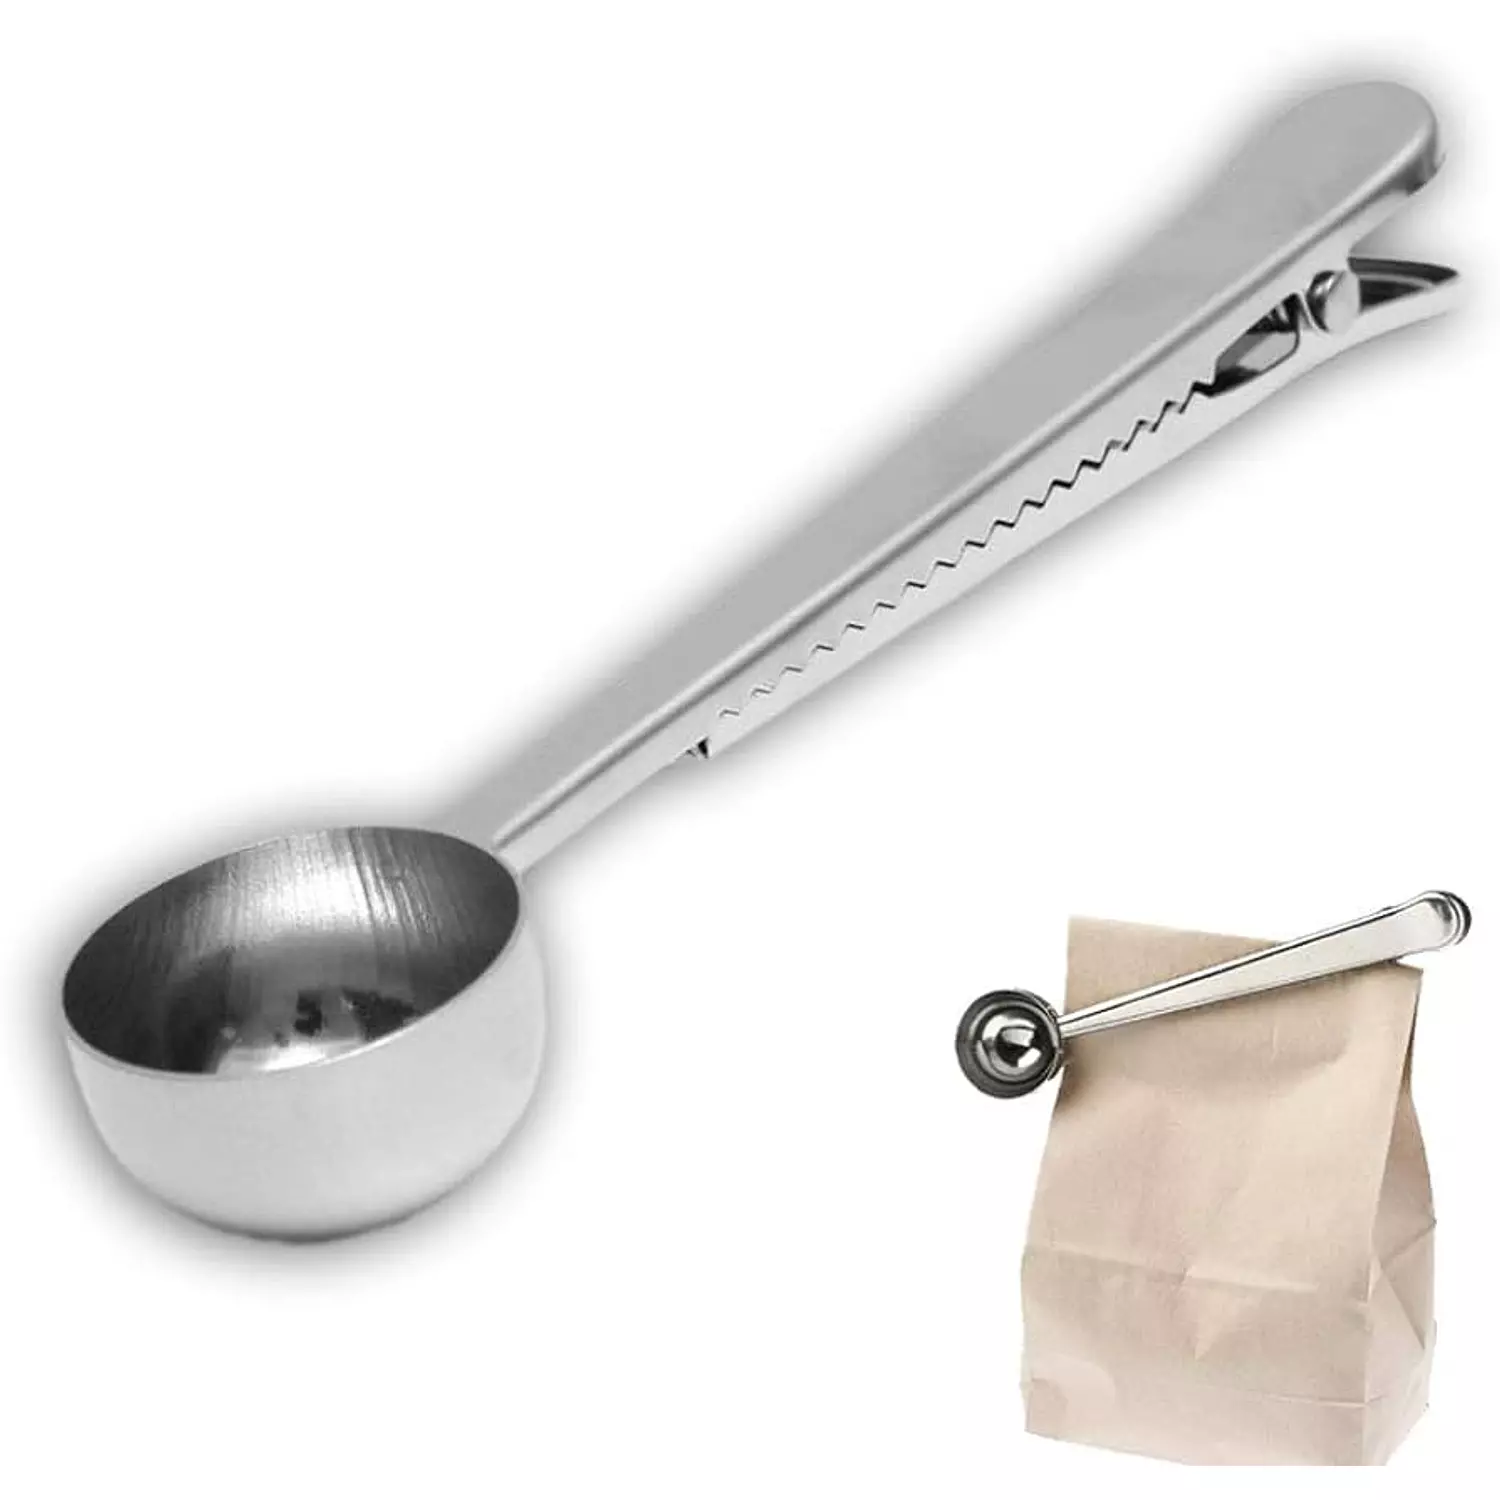 Stainless steel coffee scoop with a clip to close the bag after use hover image